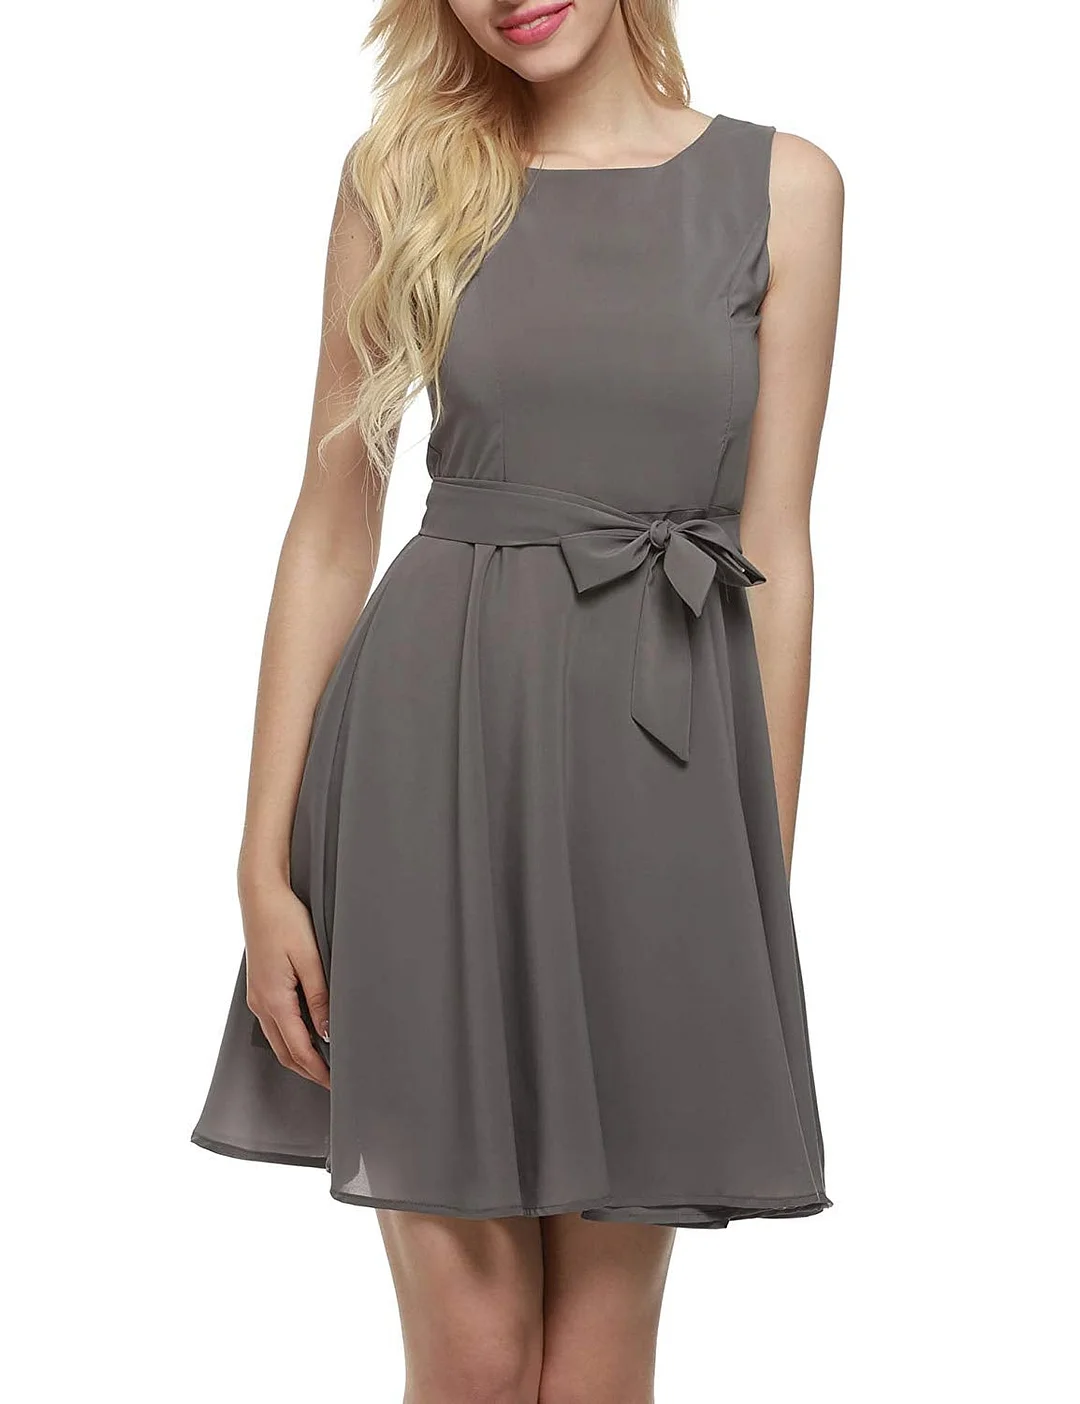 Women Chiffon Summer Sleeveless A-line Pleated Party Cocktail Dress with Belt